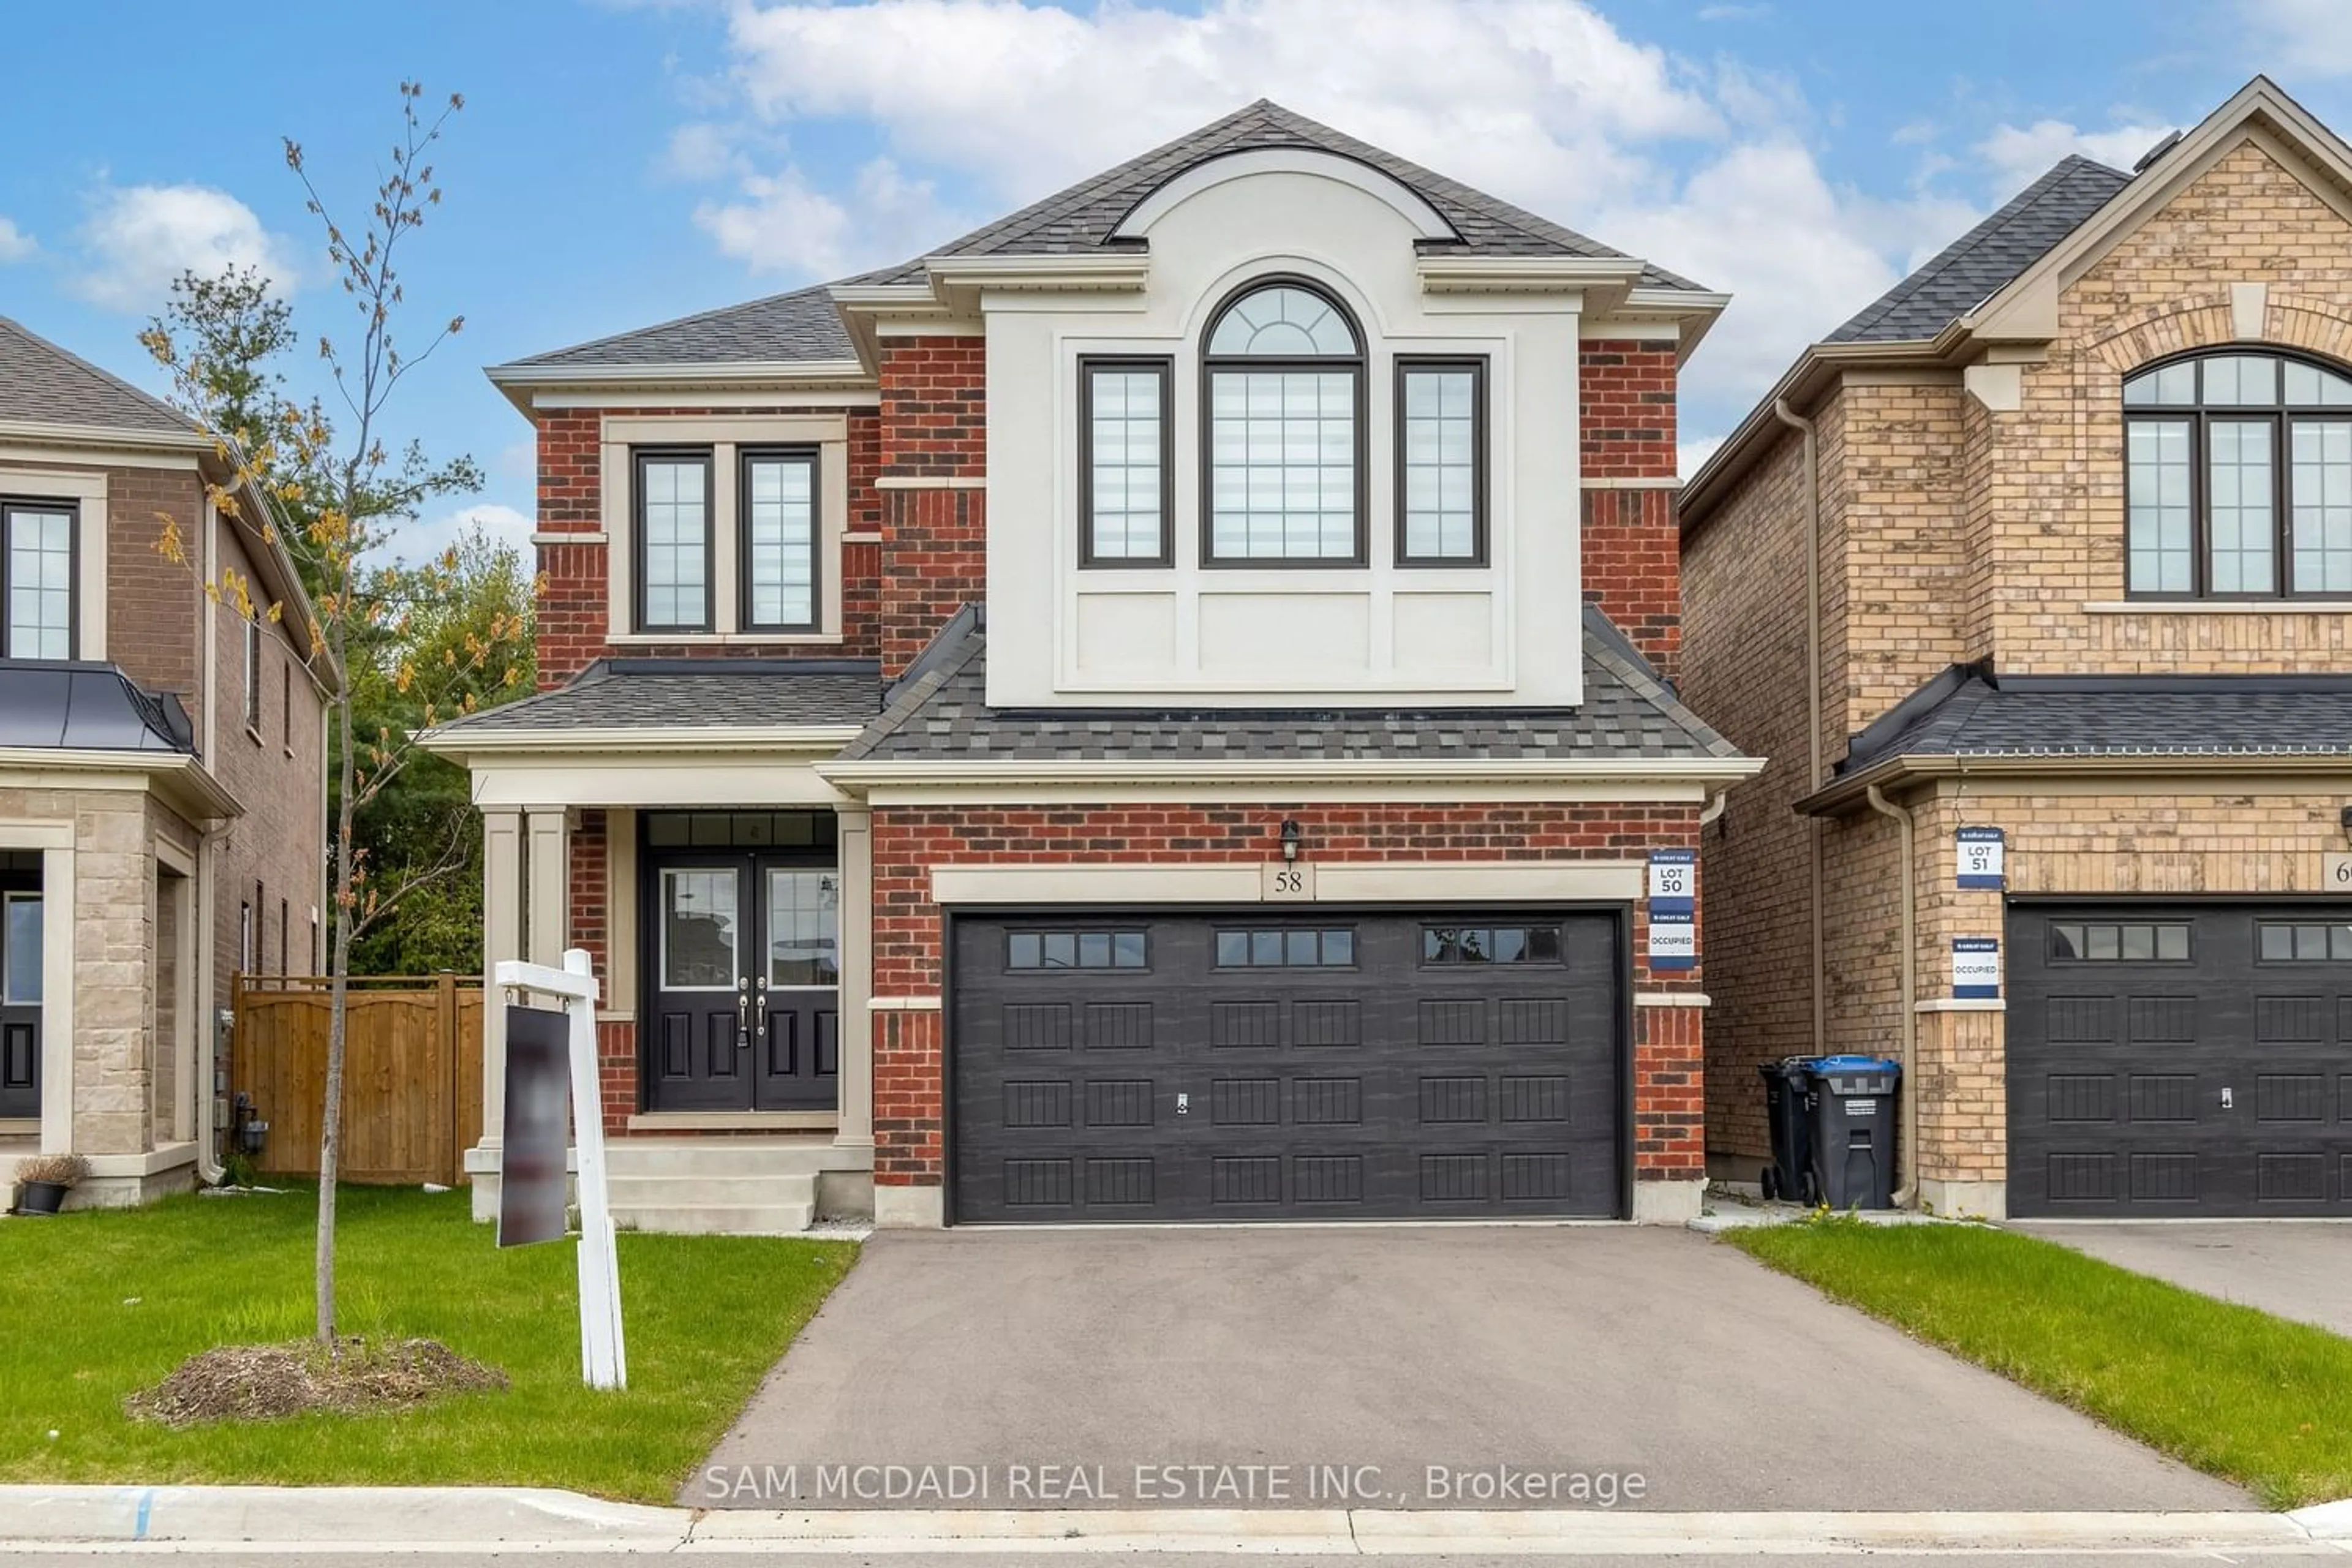 Home with brick exterior material for 58 Workgreen Park Way, Brampton Ontario L6Y 6J7